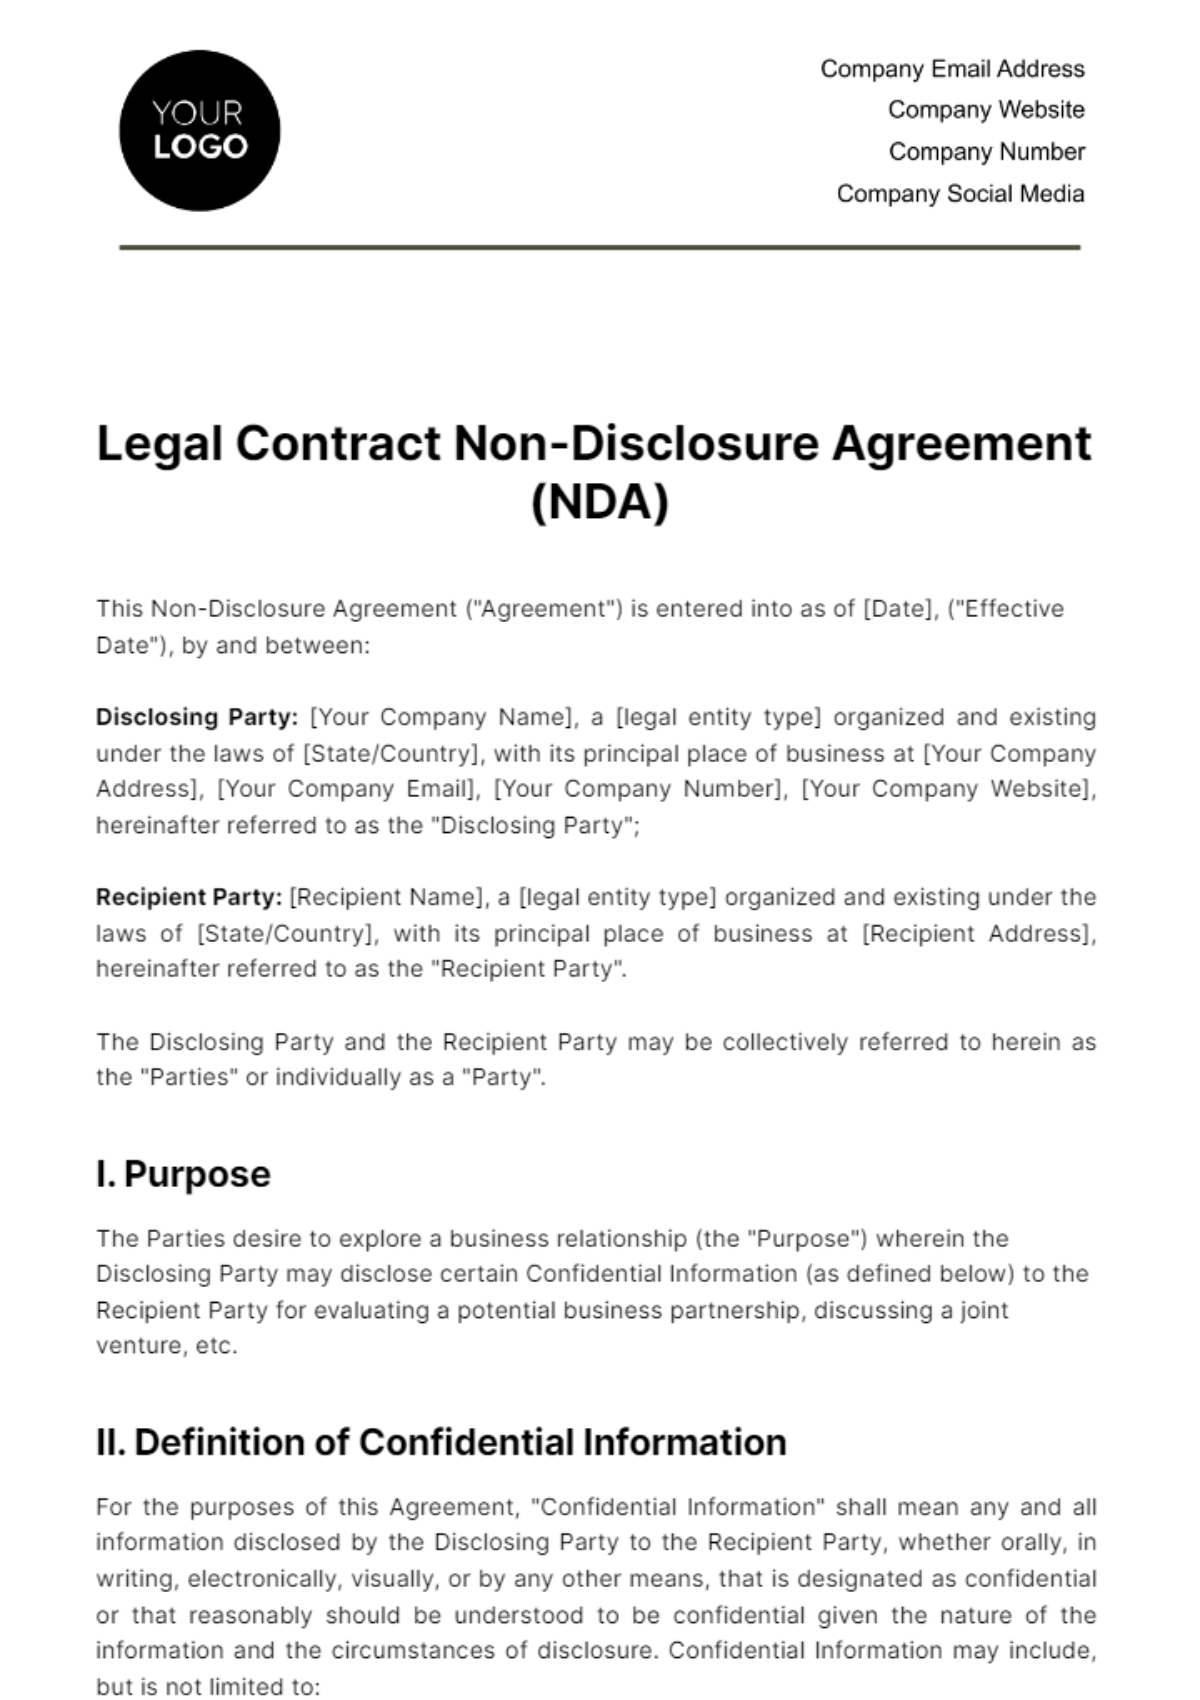 Legal Contract Non-Disclosure Agreement (NDA) Template